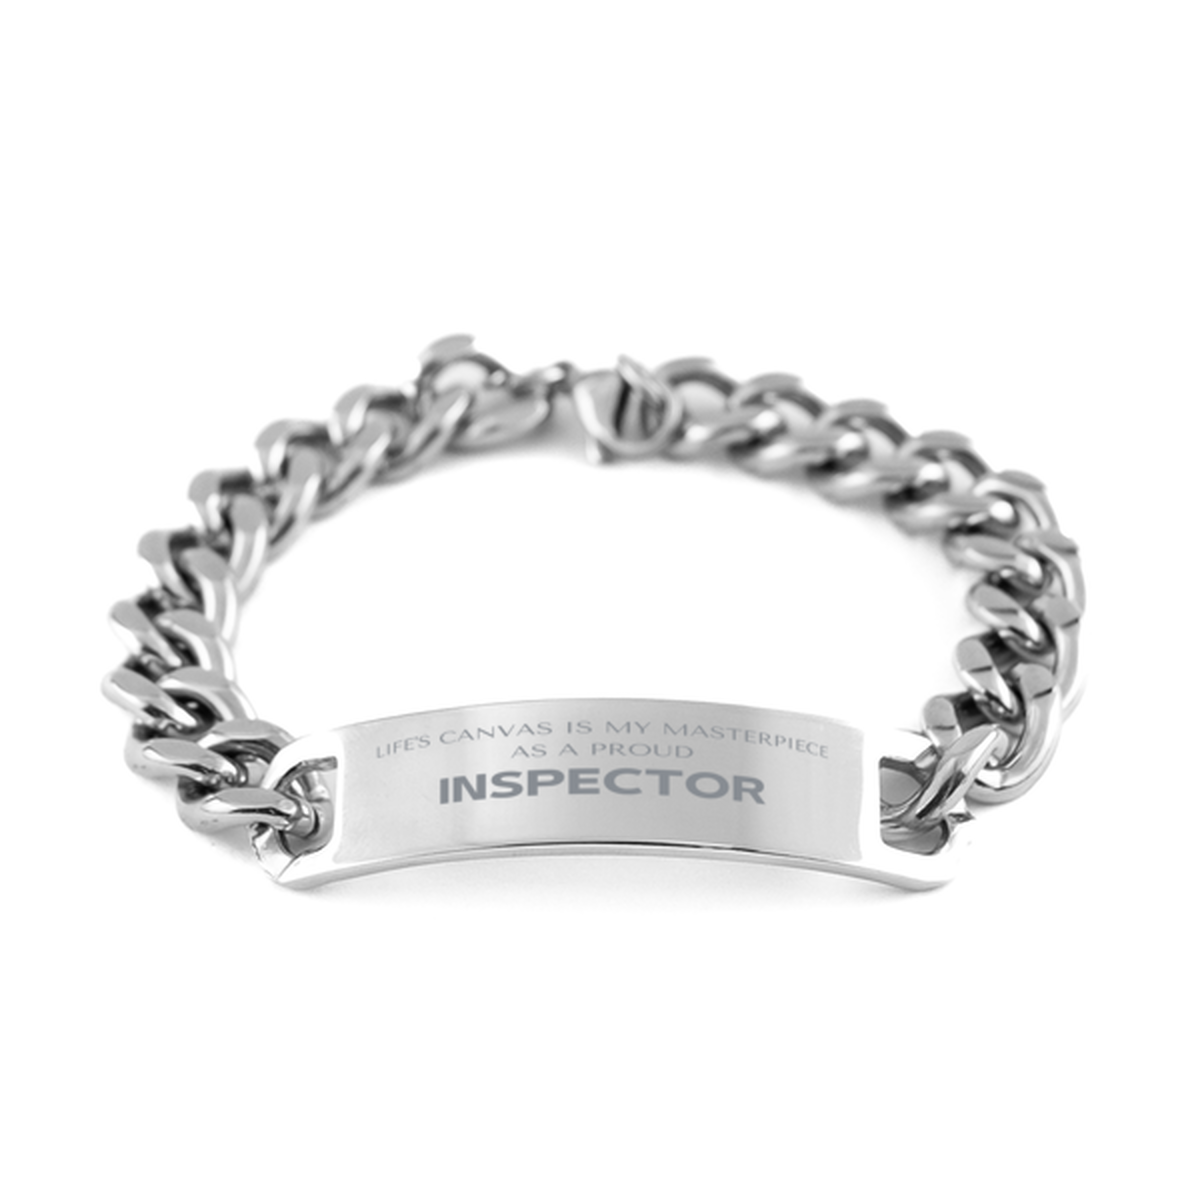 Proud Inspector Gifts, Life's canvas is my masterpiece, Epic Birthday Christmas Unique Cuban Chain Stainless Steel Bracelet For Inspector, Coworkers, Men, Women, Friends